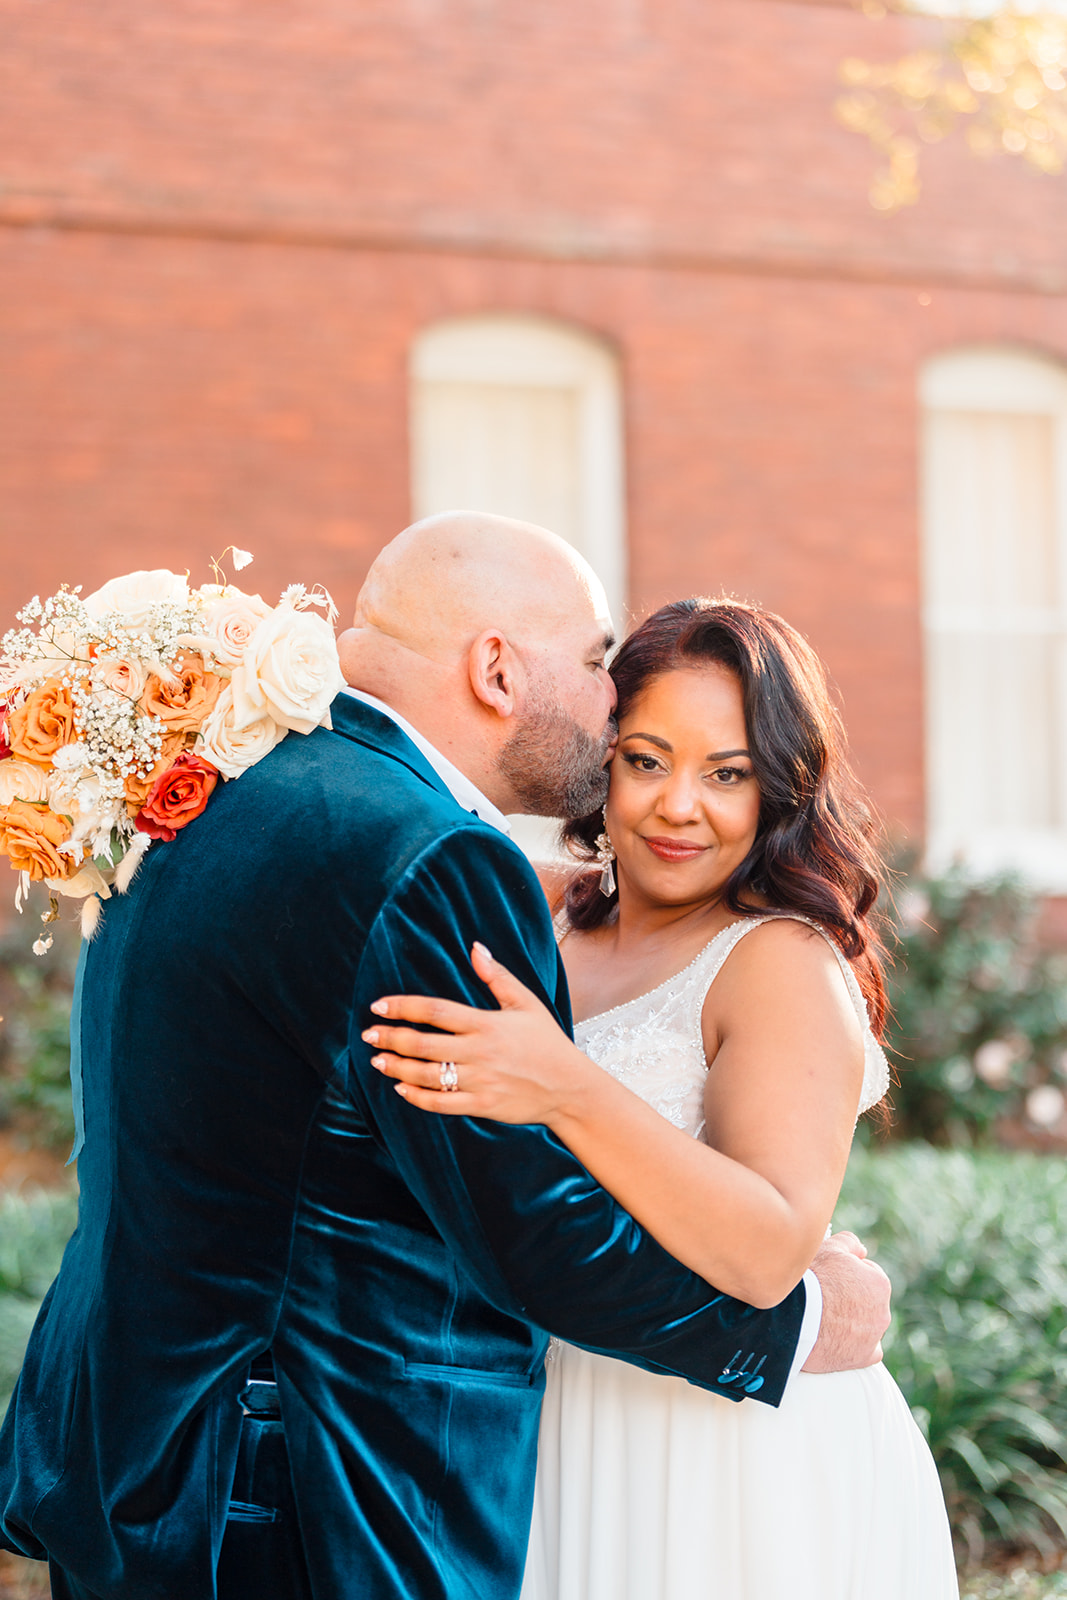 Close-up of Alberto kissing his wife's cheek as she looks at the camera outside the front of Venue 1902, captured by Jerzy Nieves Photography.